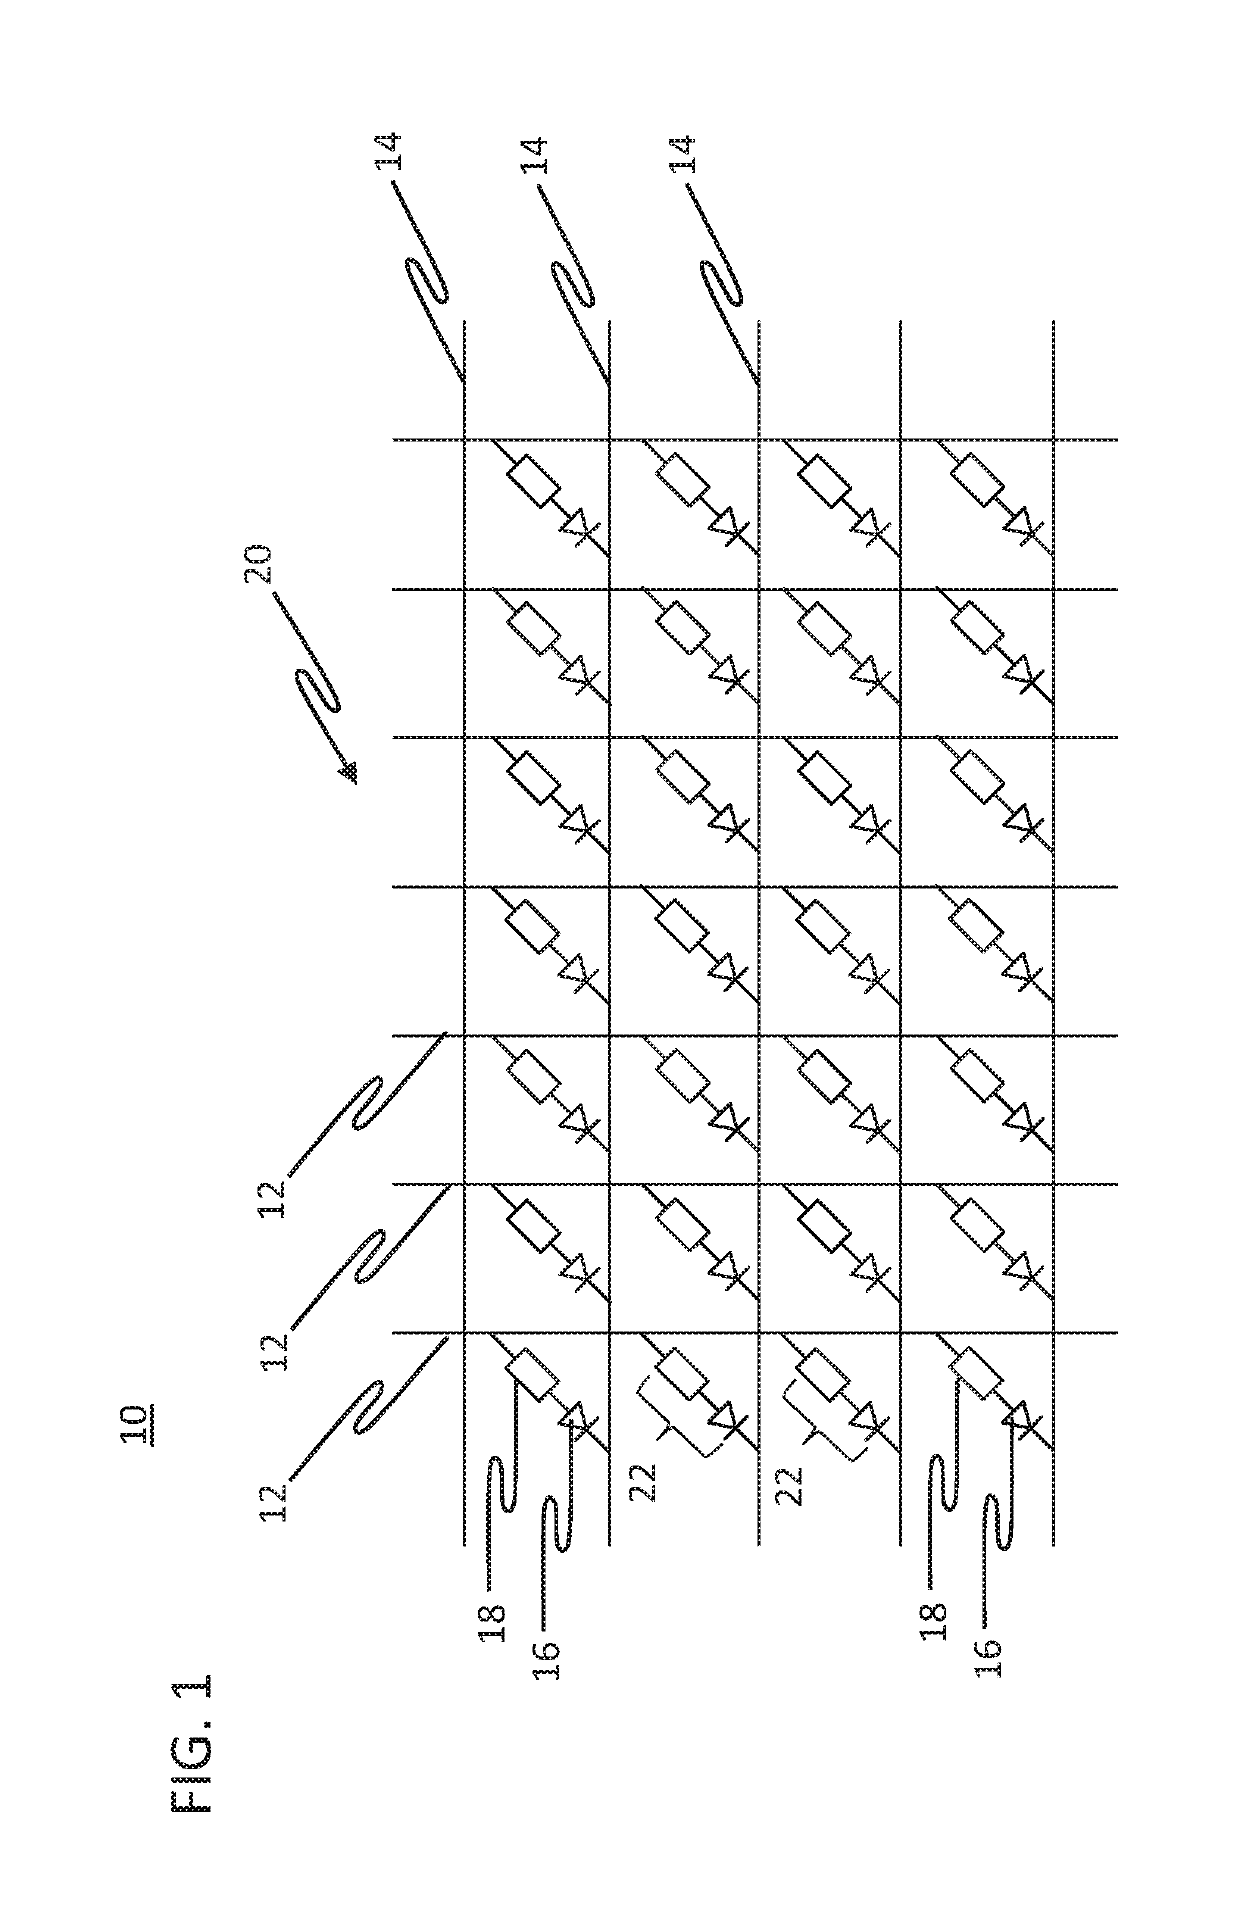 Phase change memory array with integrated polycrystalline diodes